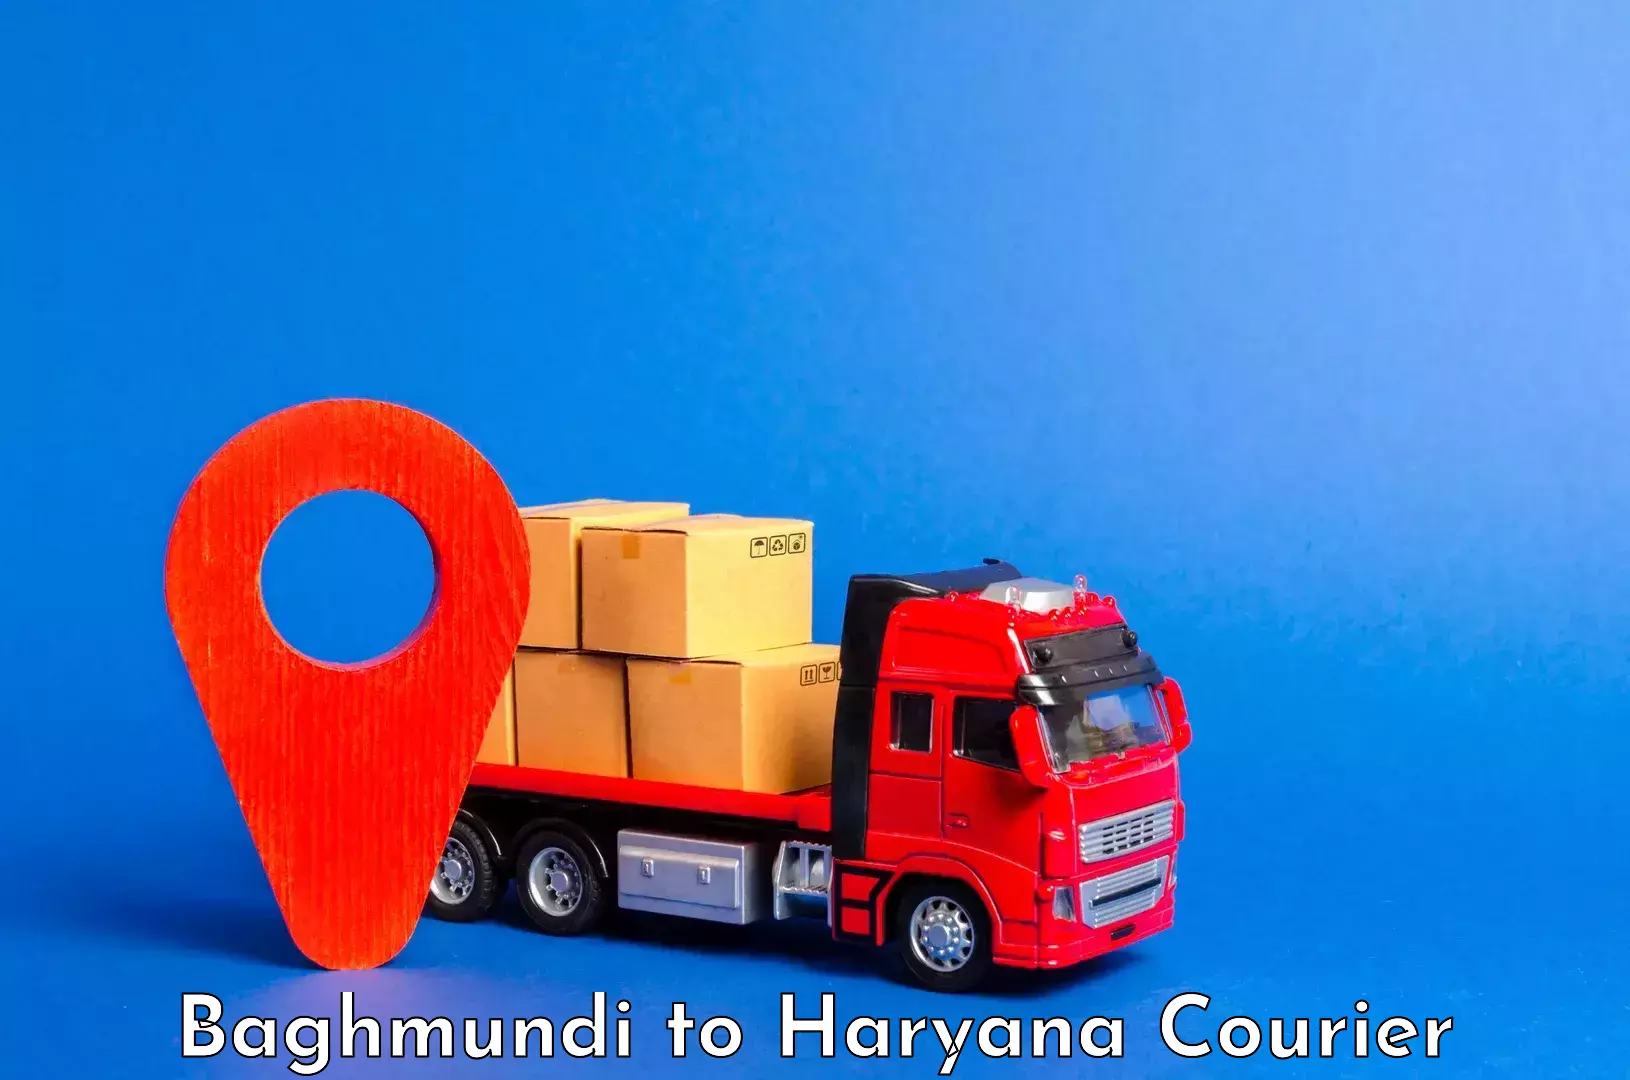 Instant baggage transport quote Baghmundi to Gurgaon